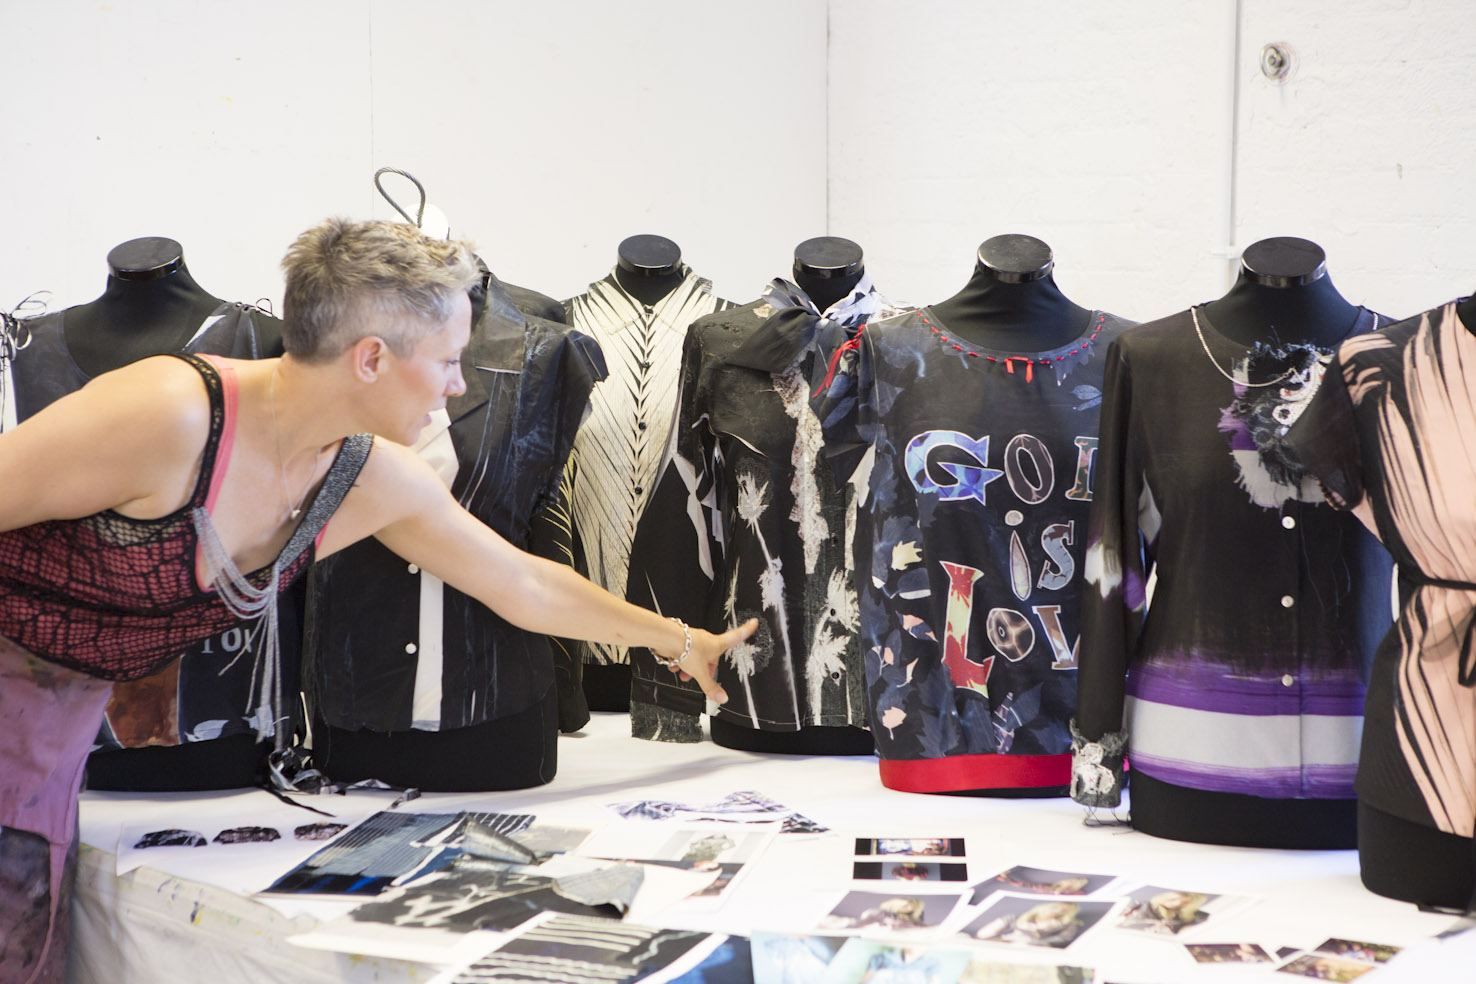 Rebecca Earley in a workshop working with shirts on mannequins and images laid out on a table